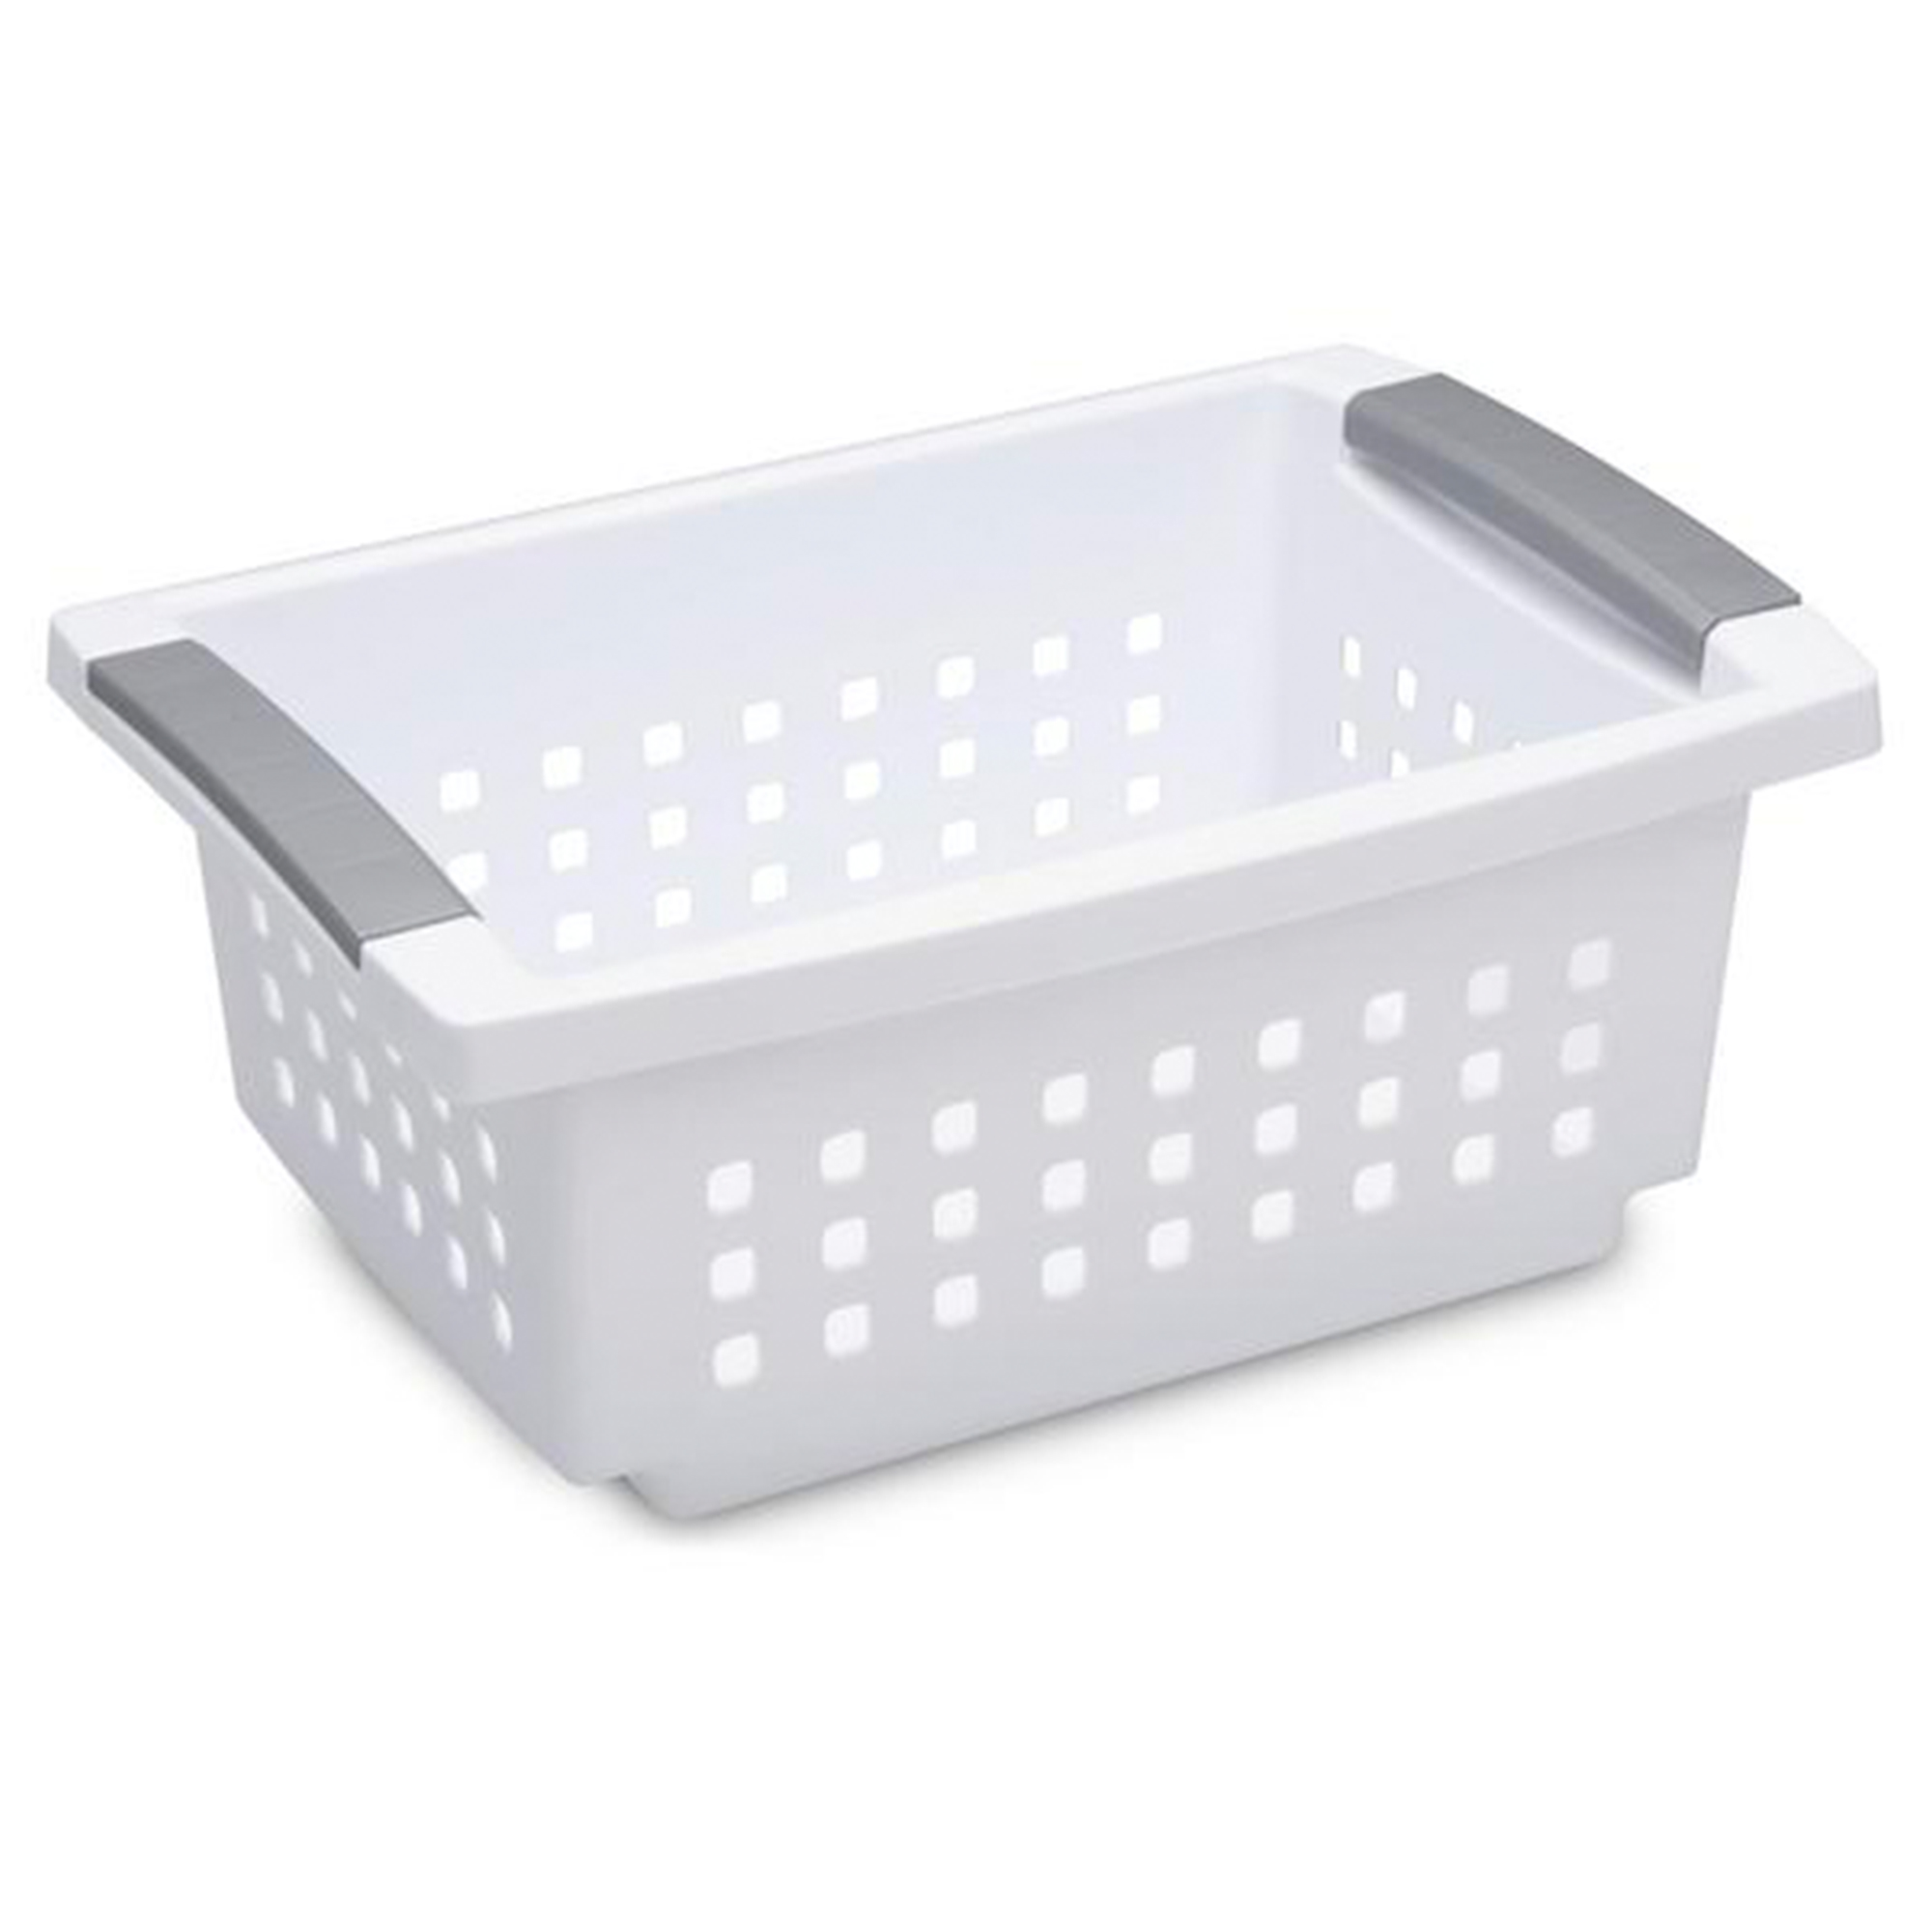 Sterilite Small Stacking Storage Basket with Comfort Grip Handles, 8 Pack - image 2 of 11